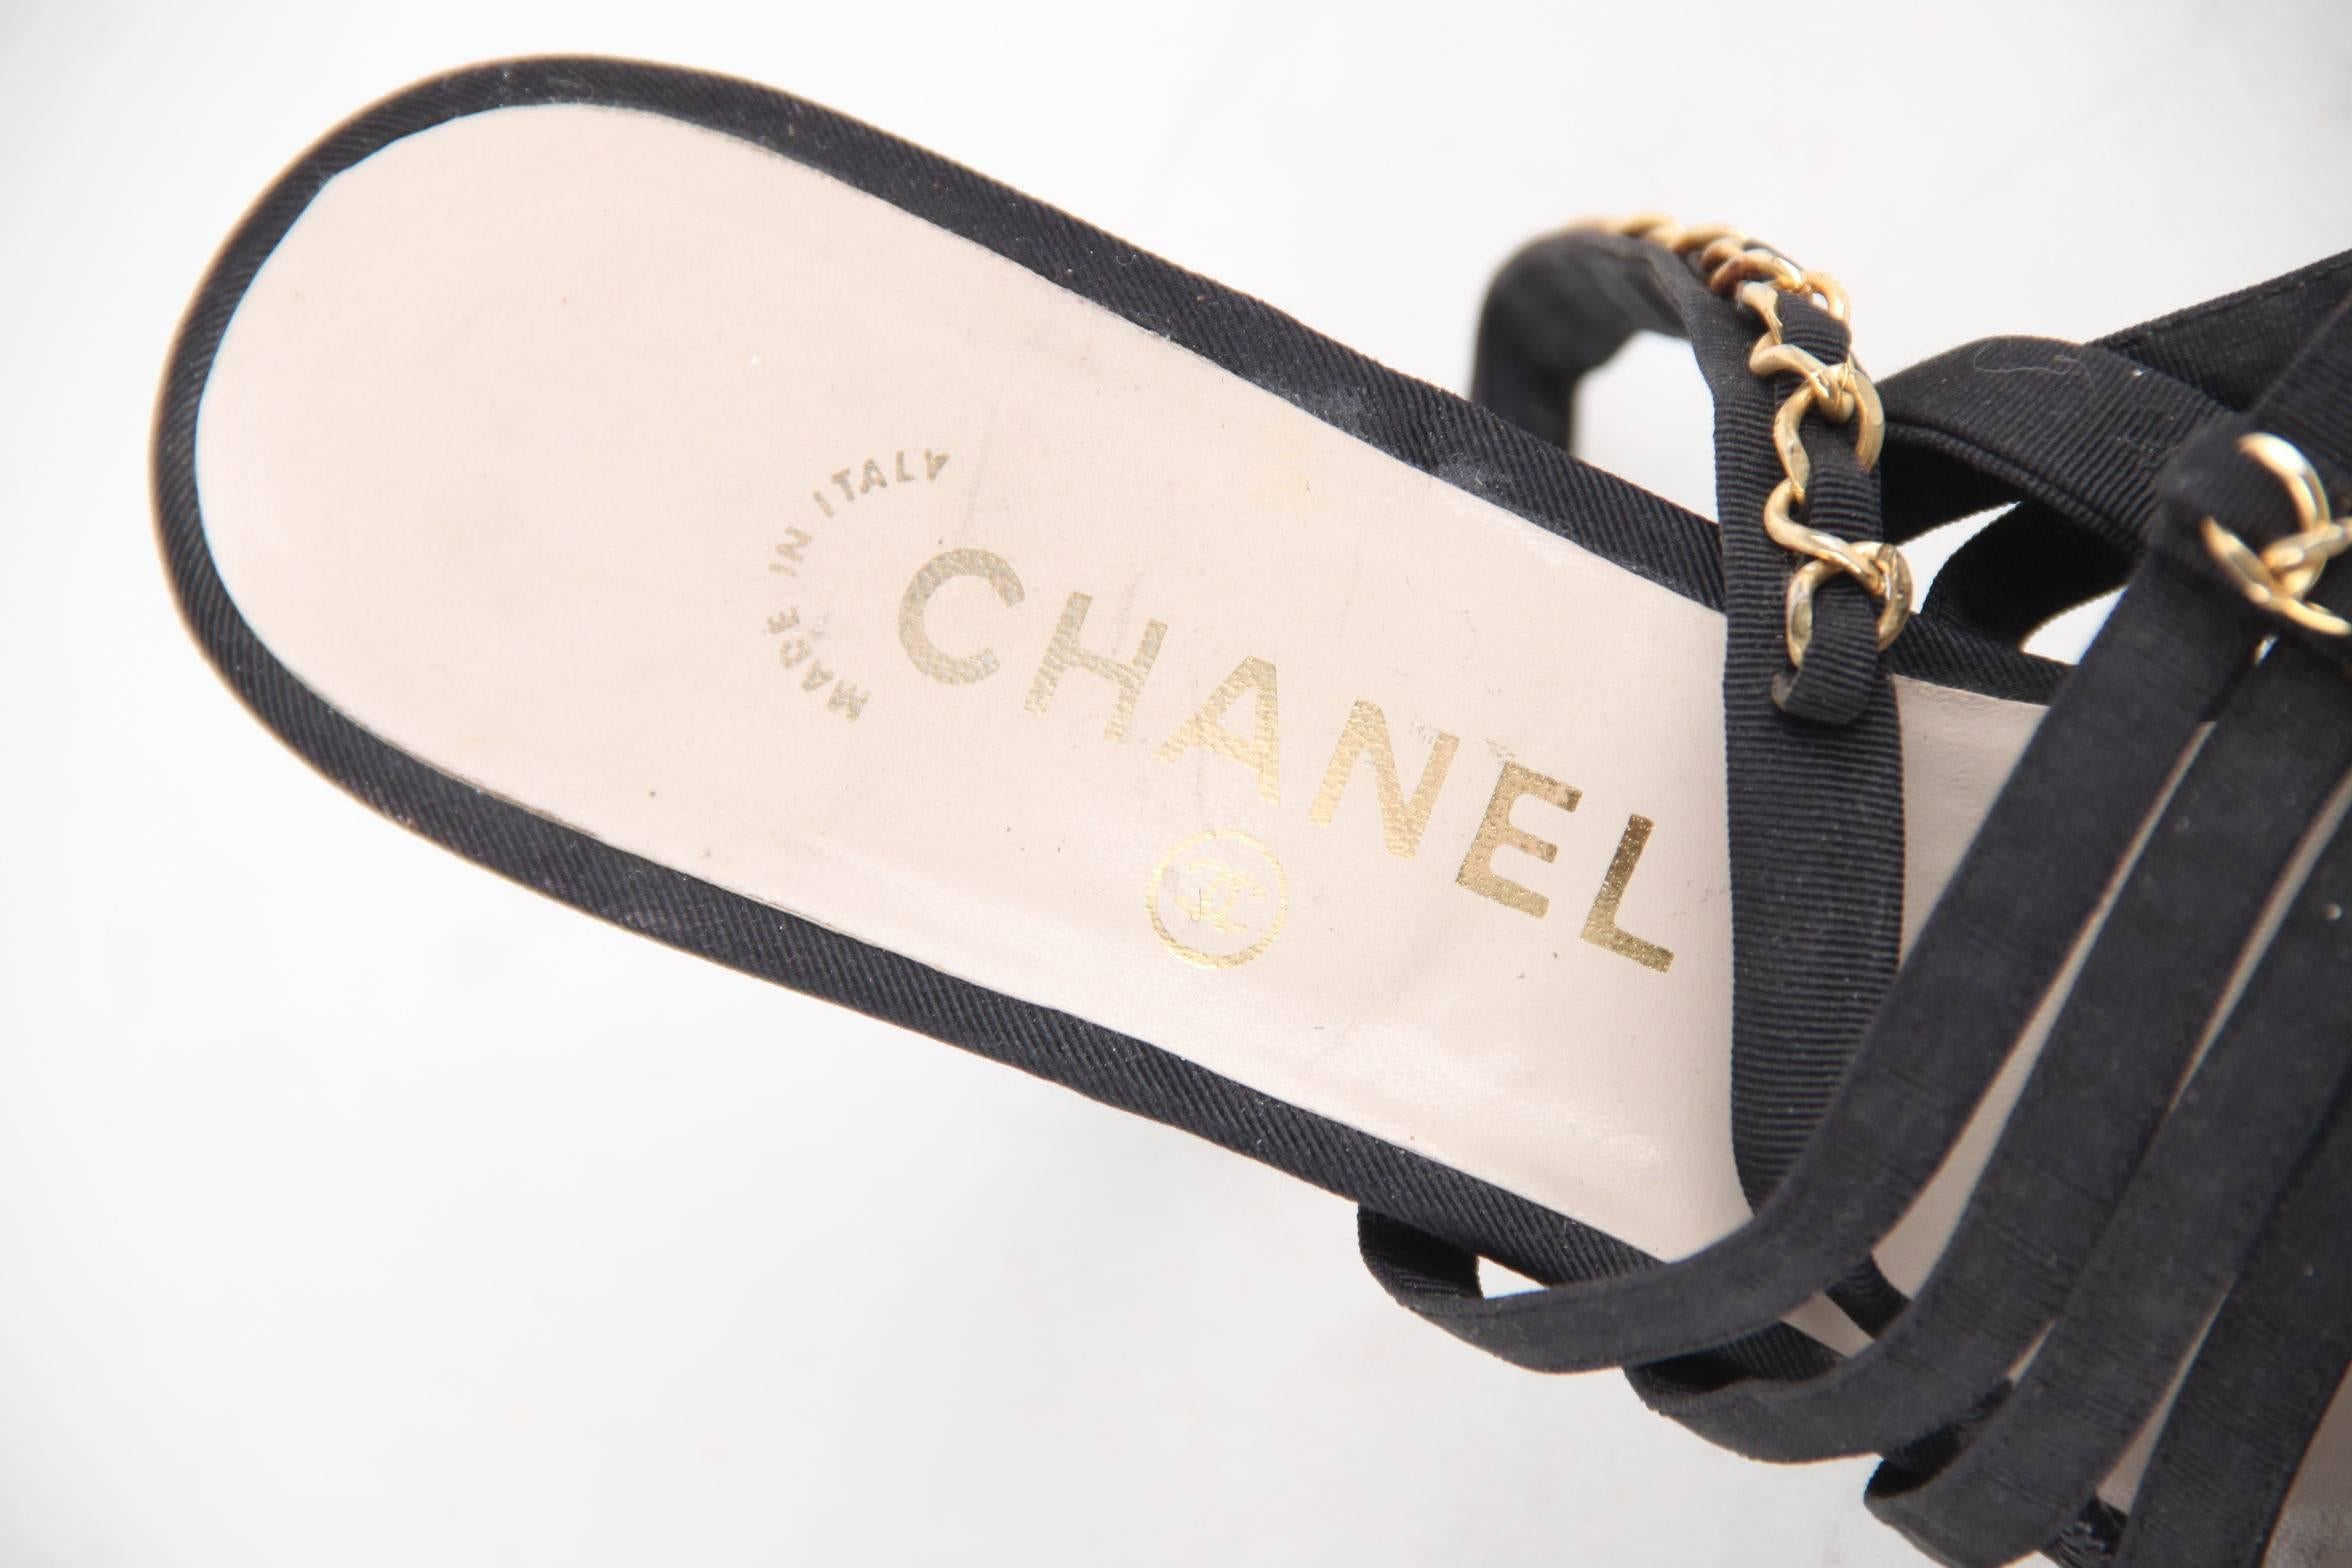 Brand: CHANEL - Made in Italy

Condition (please read our condition chart below) GOOD CONDITION: Some light wear or small defect. This condition rate is very common for vintage items.

Further Comments: Elasticated ankle strap - Pointed toes -